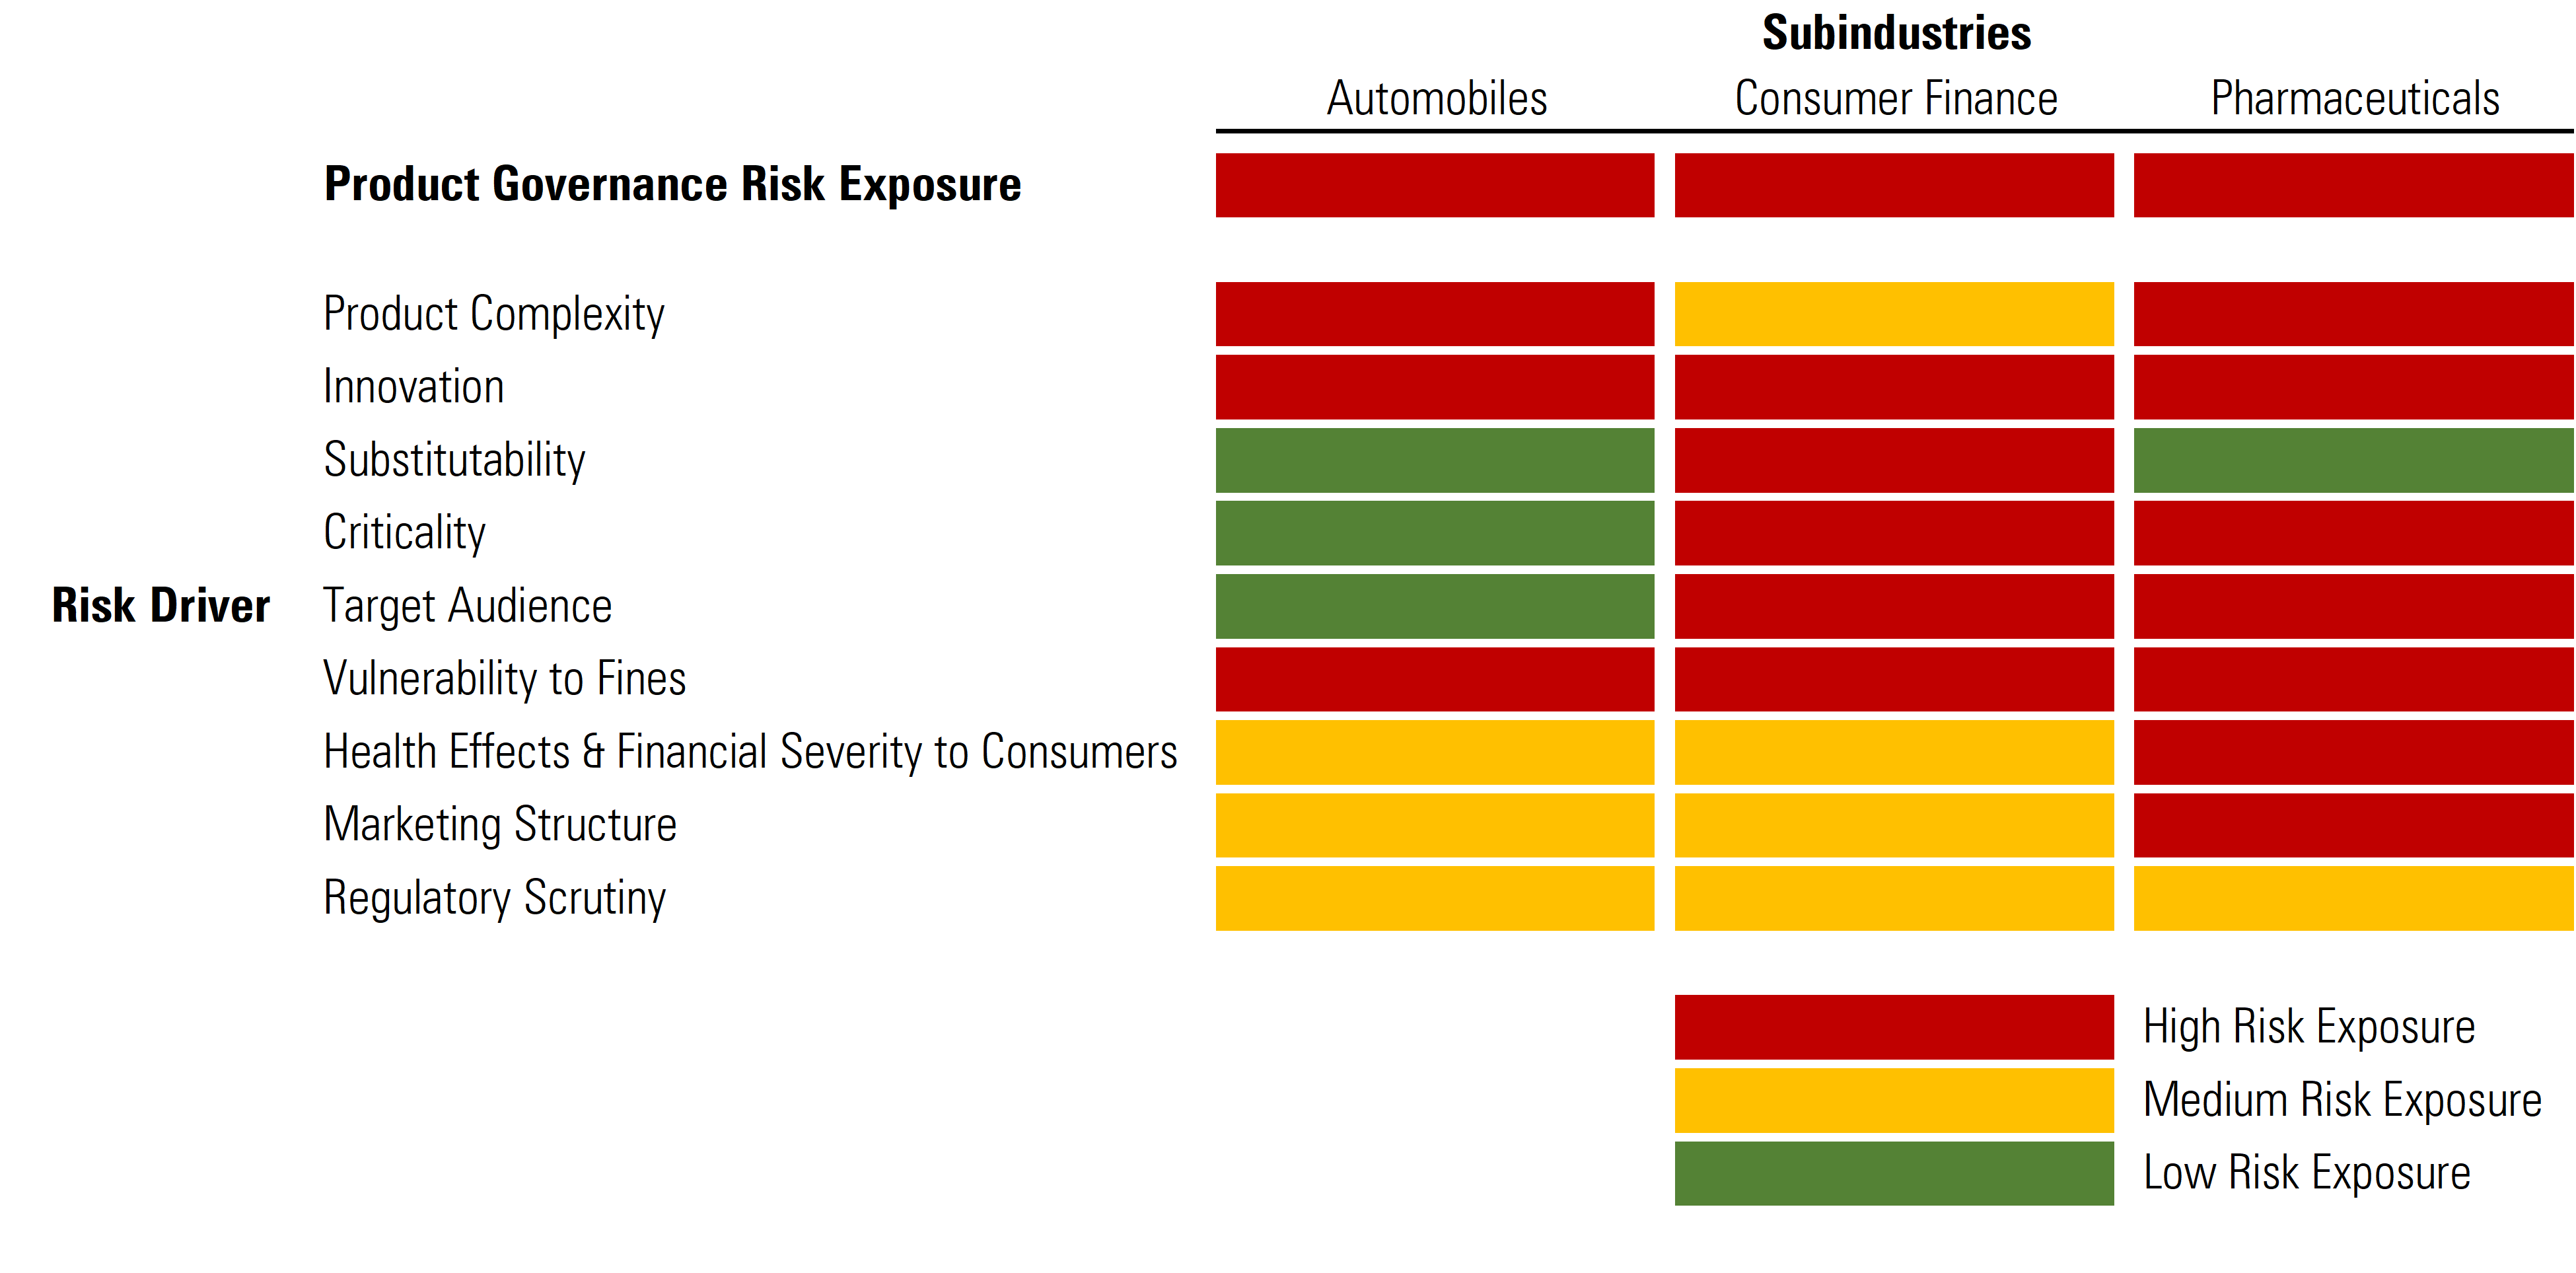 Chart shows high product governance risk exposure for automobiles, consumer finance, and pharmaceuticals.